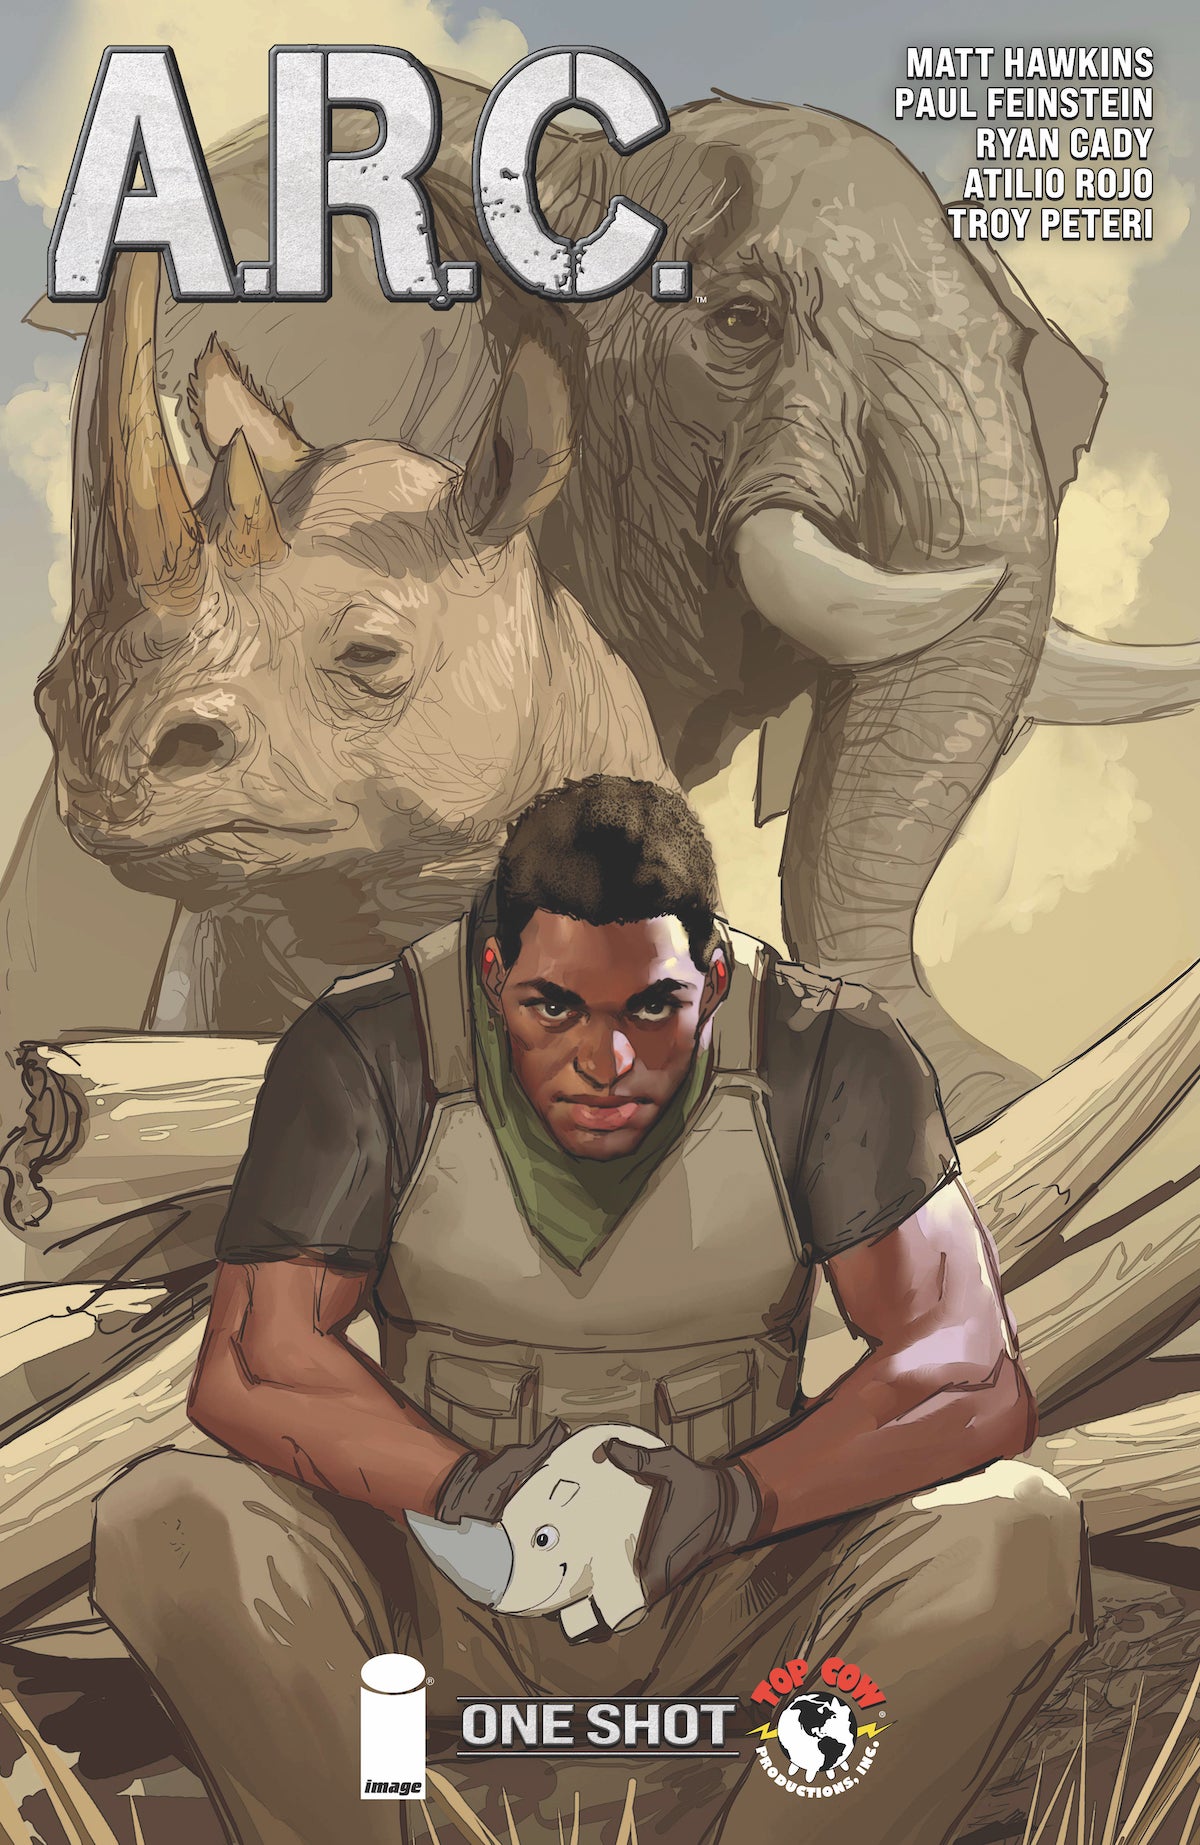 Animal rights take center stage in action-oriented anti-poaching comic  . from Top Cow & Image Comics | Popverse